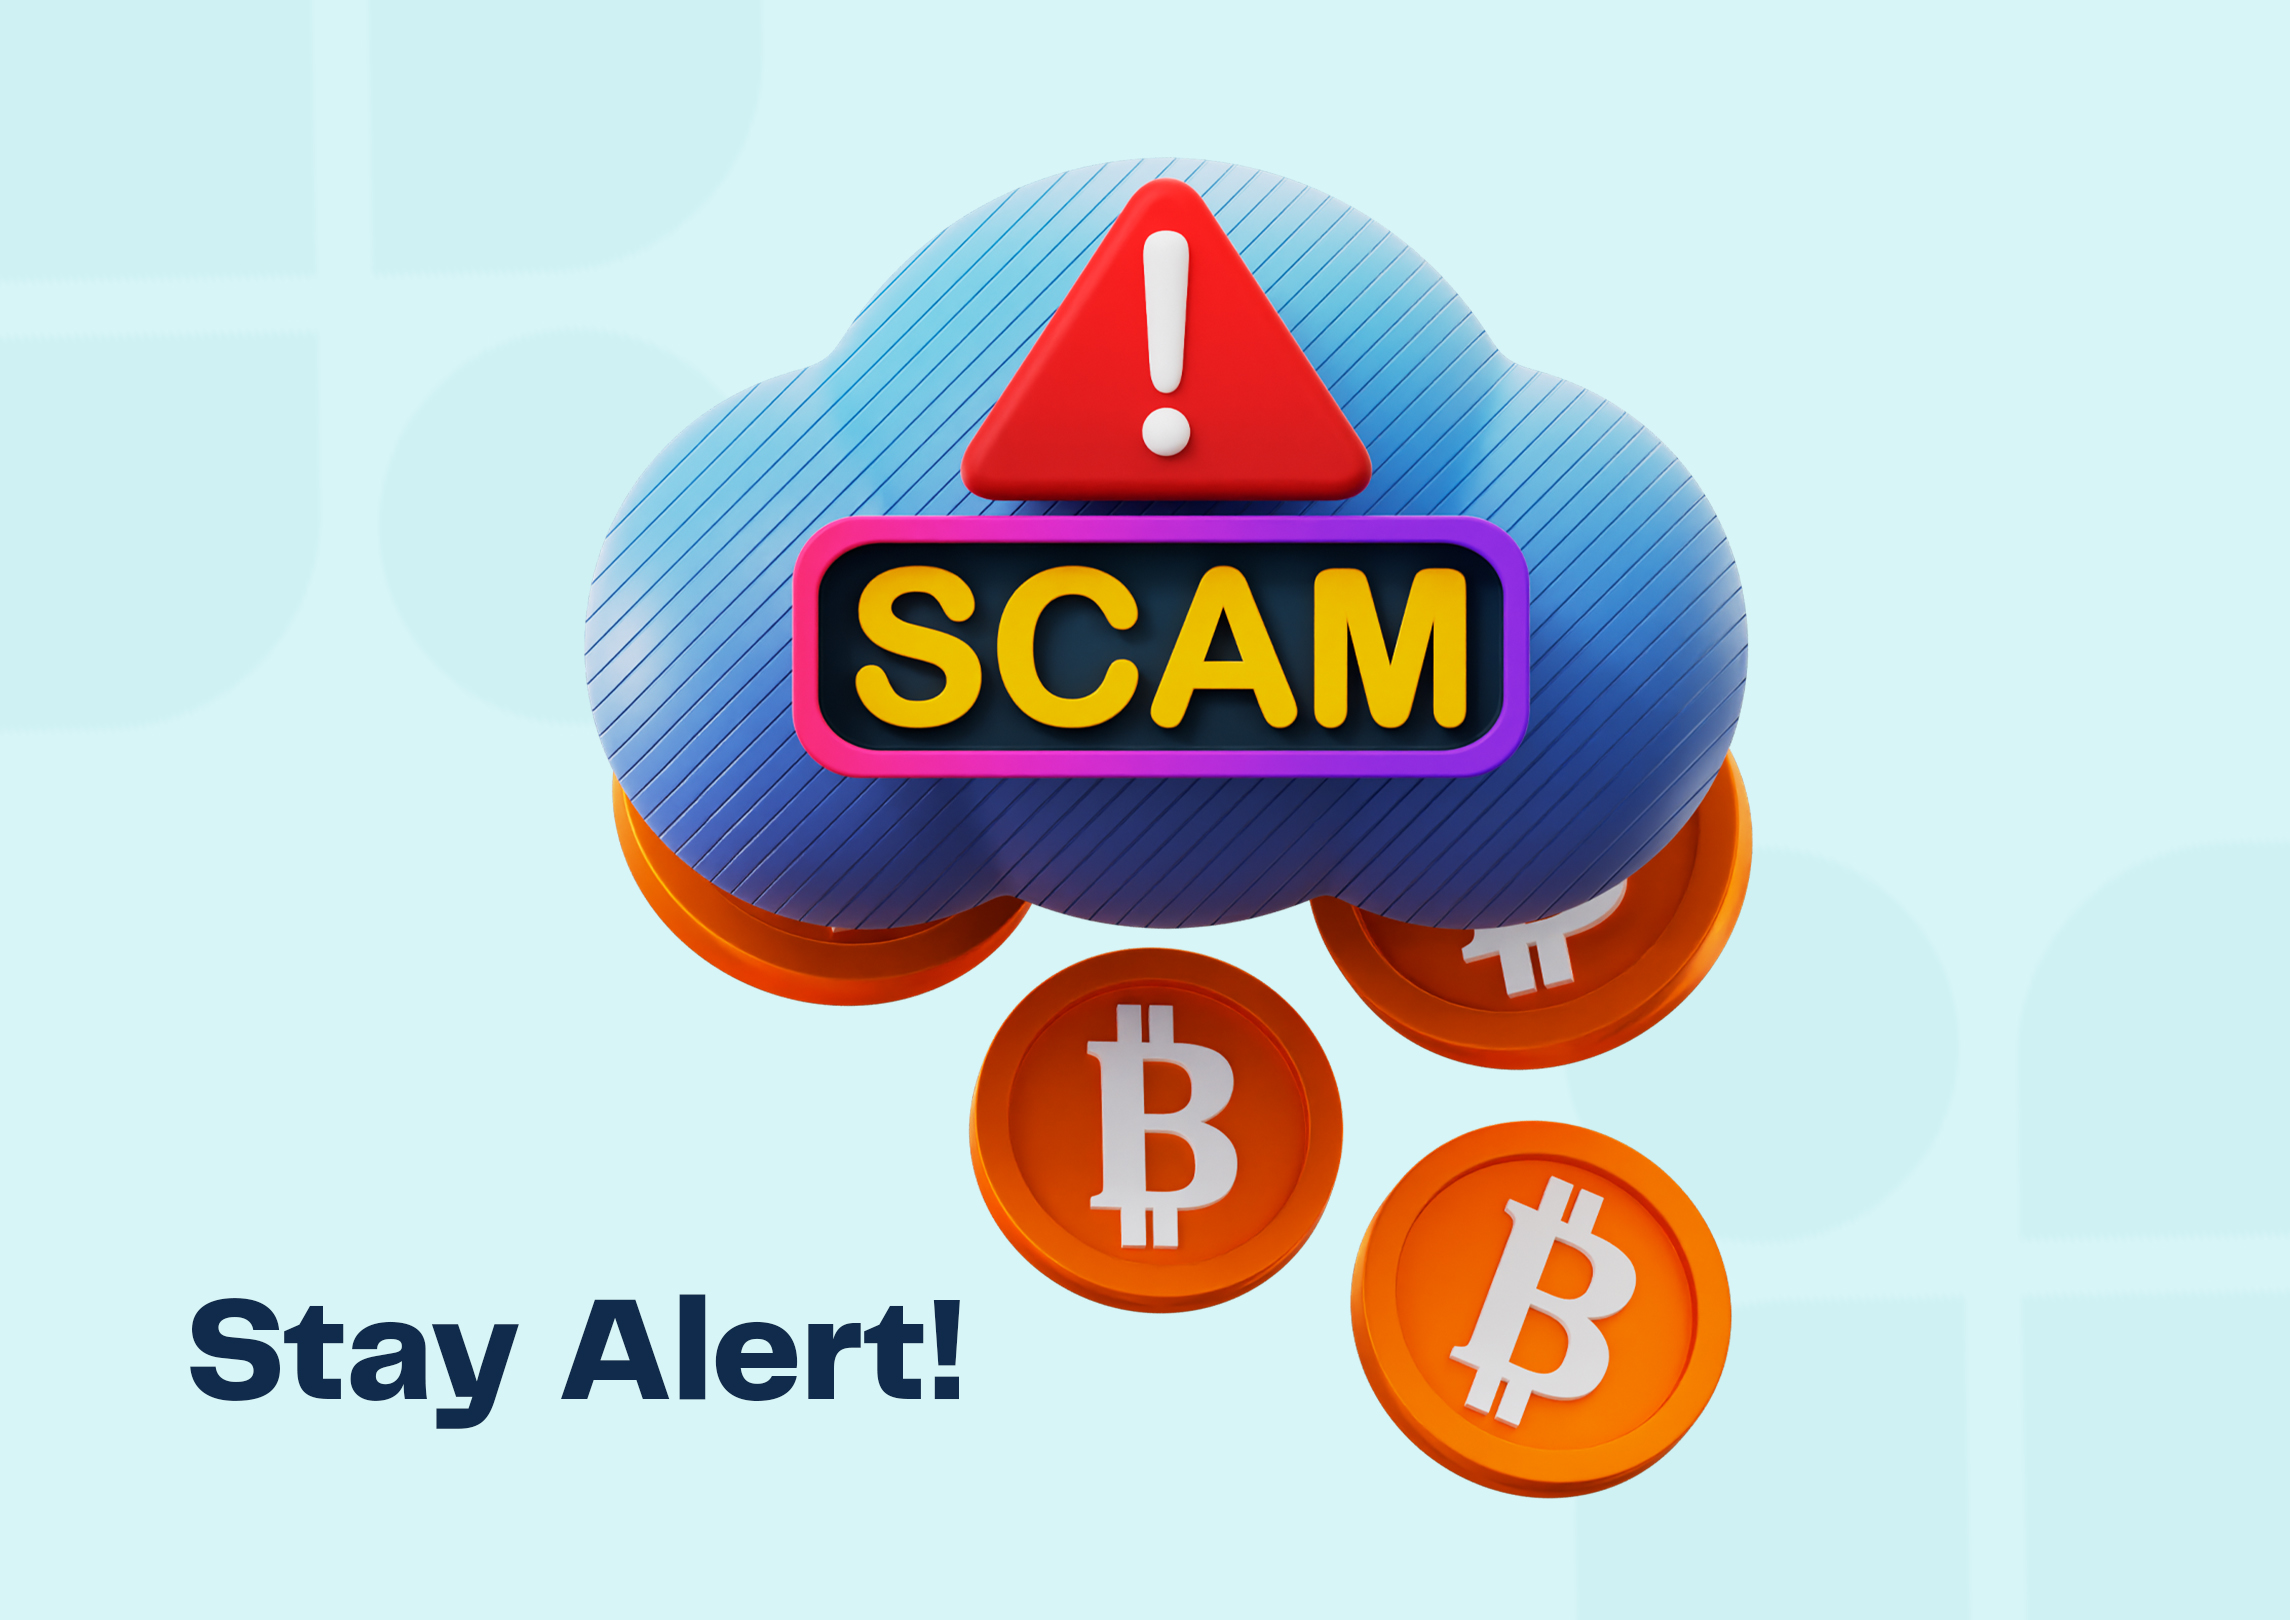 P2P Crypto Trading In Nigeria - How To Avoid P2P Scams